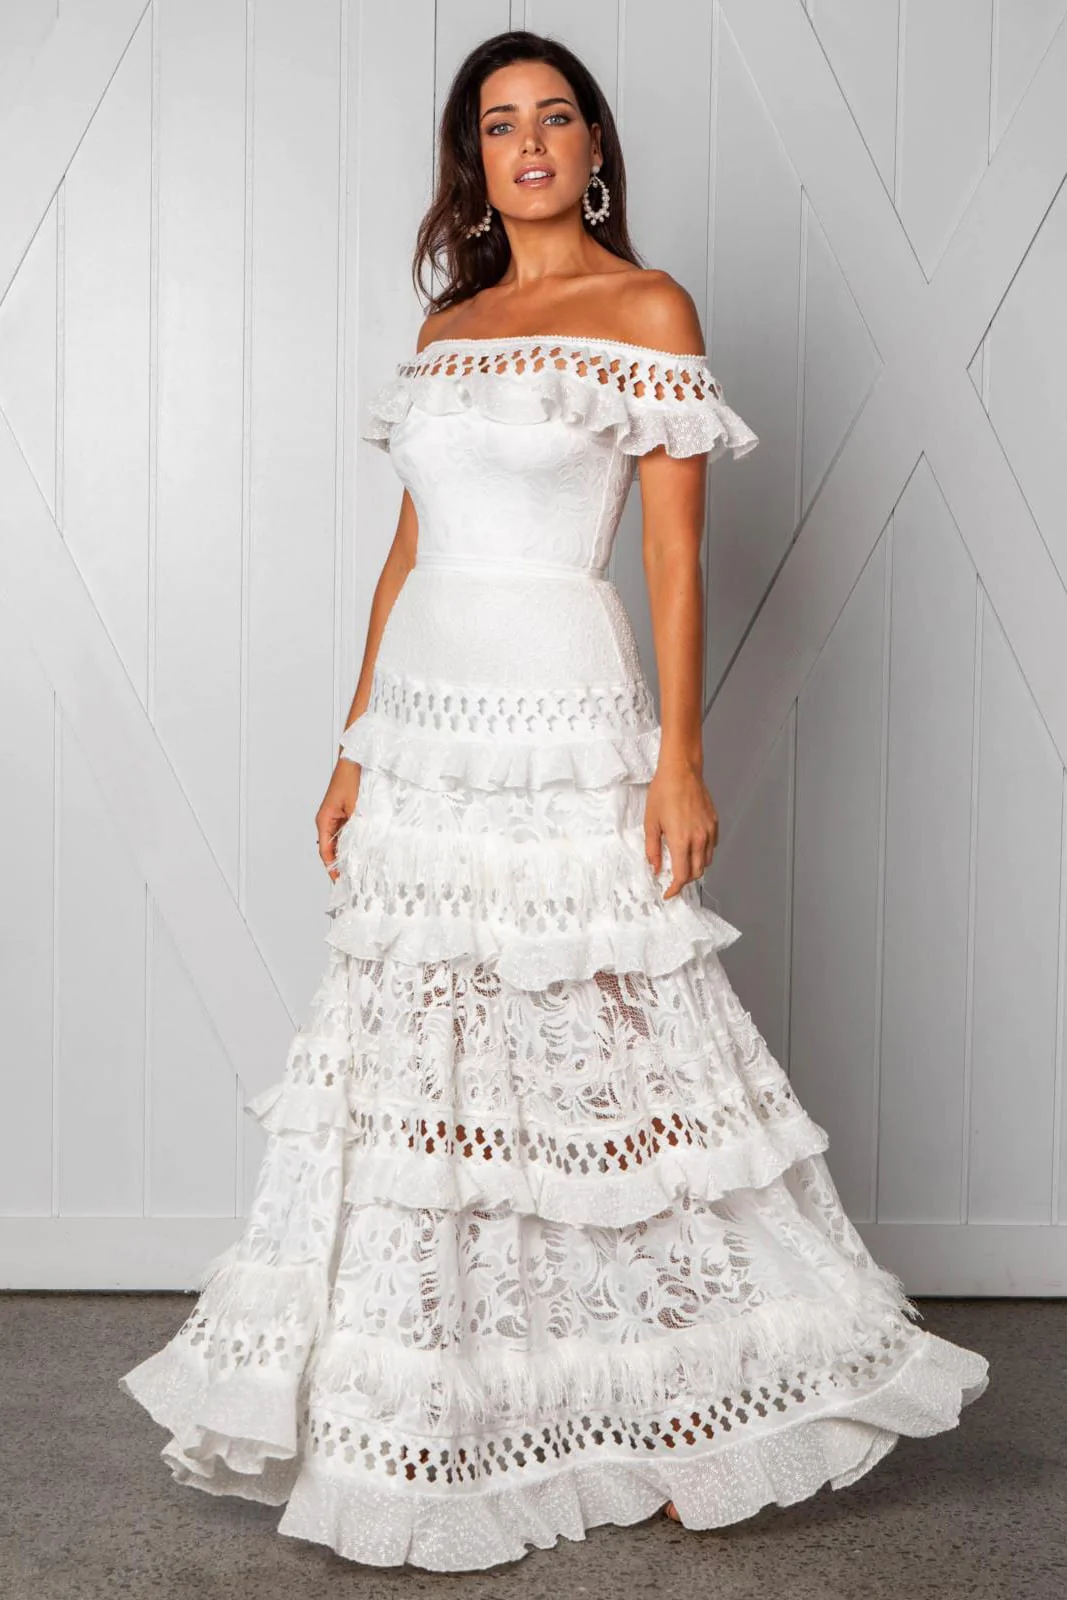 traditional mexican wedding dress off the shoulder bohemian lace